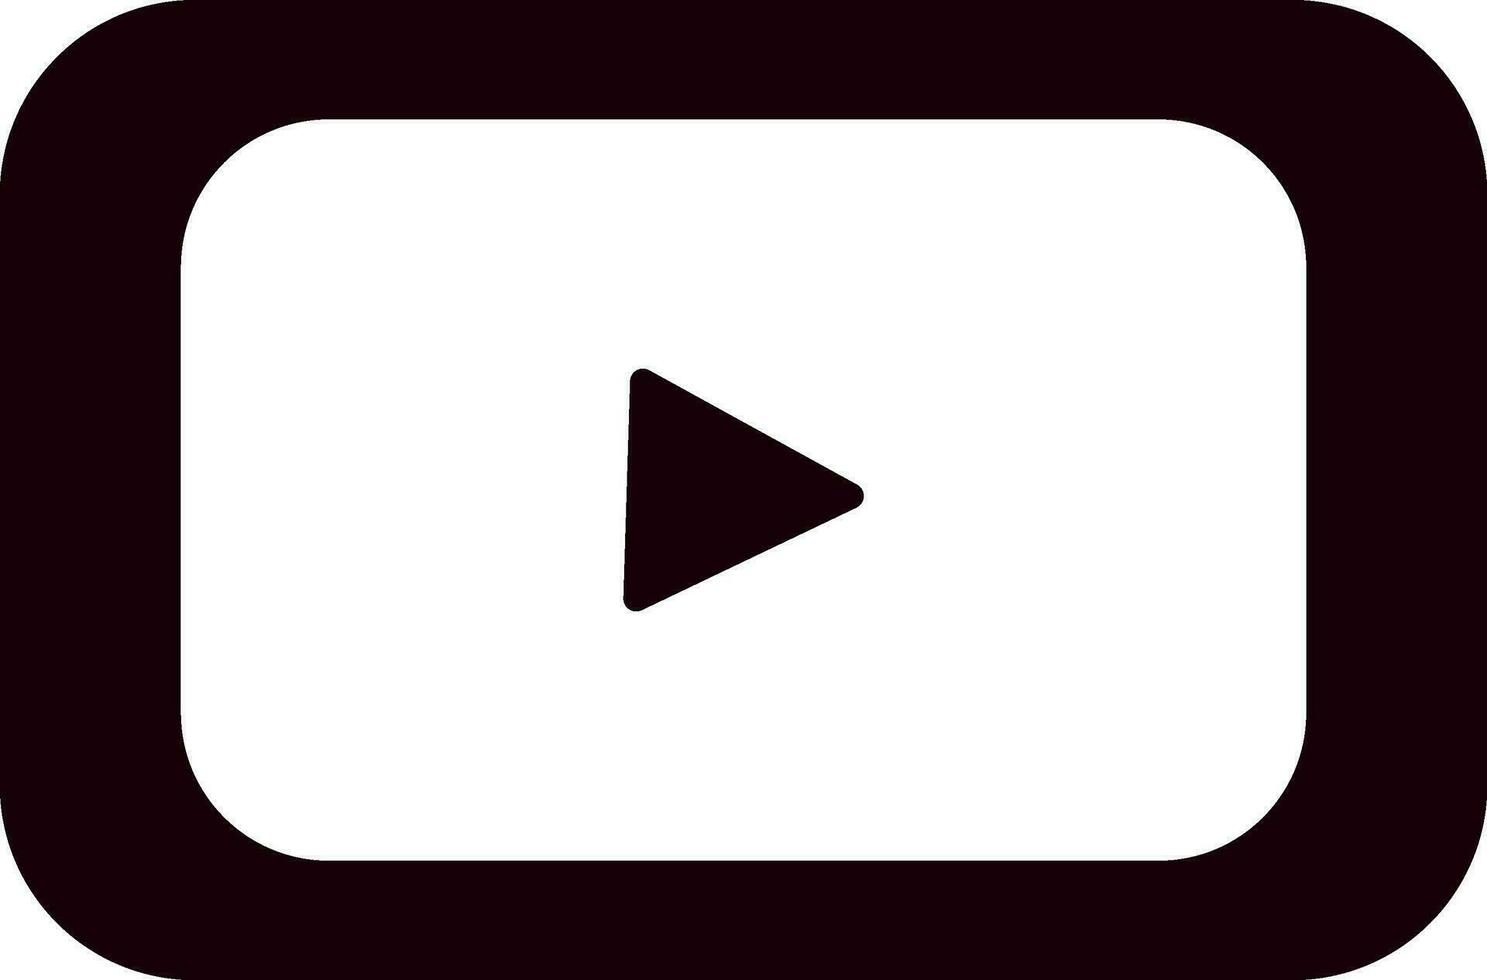 Black and white youtube icon in flat style. vector